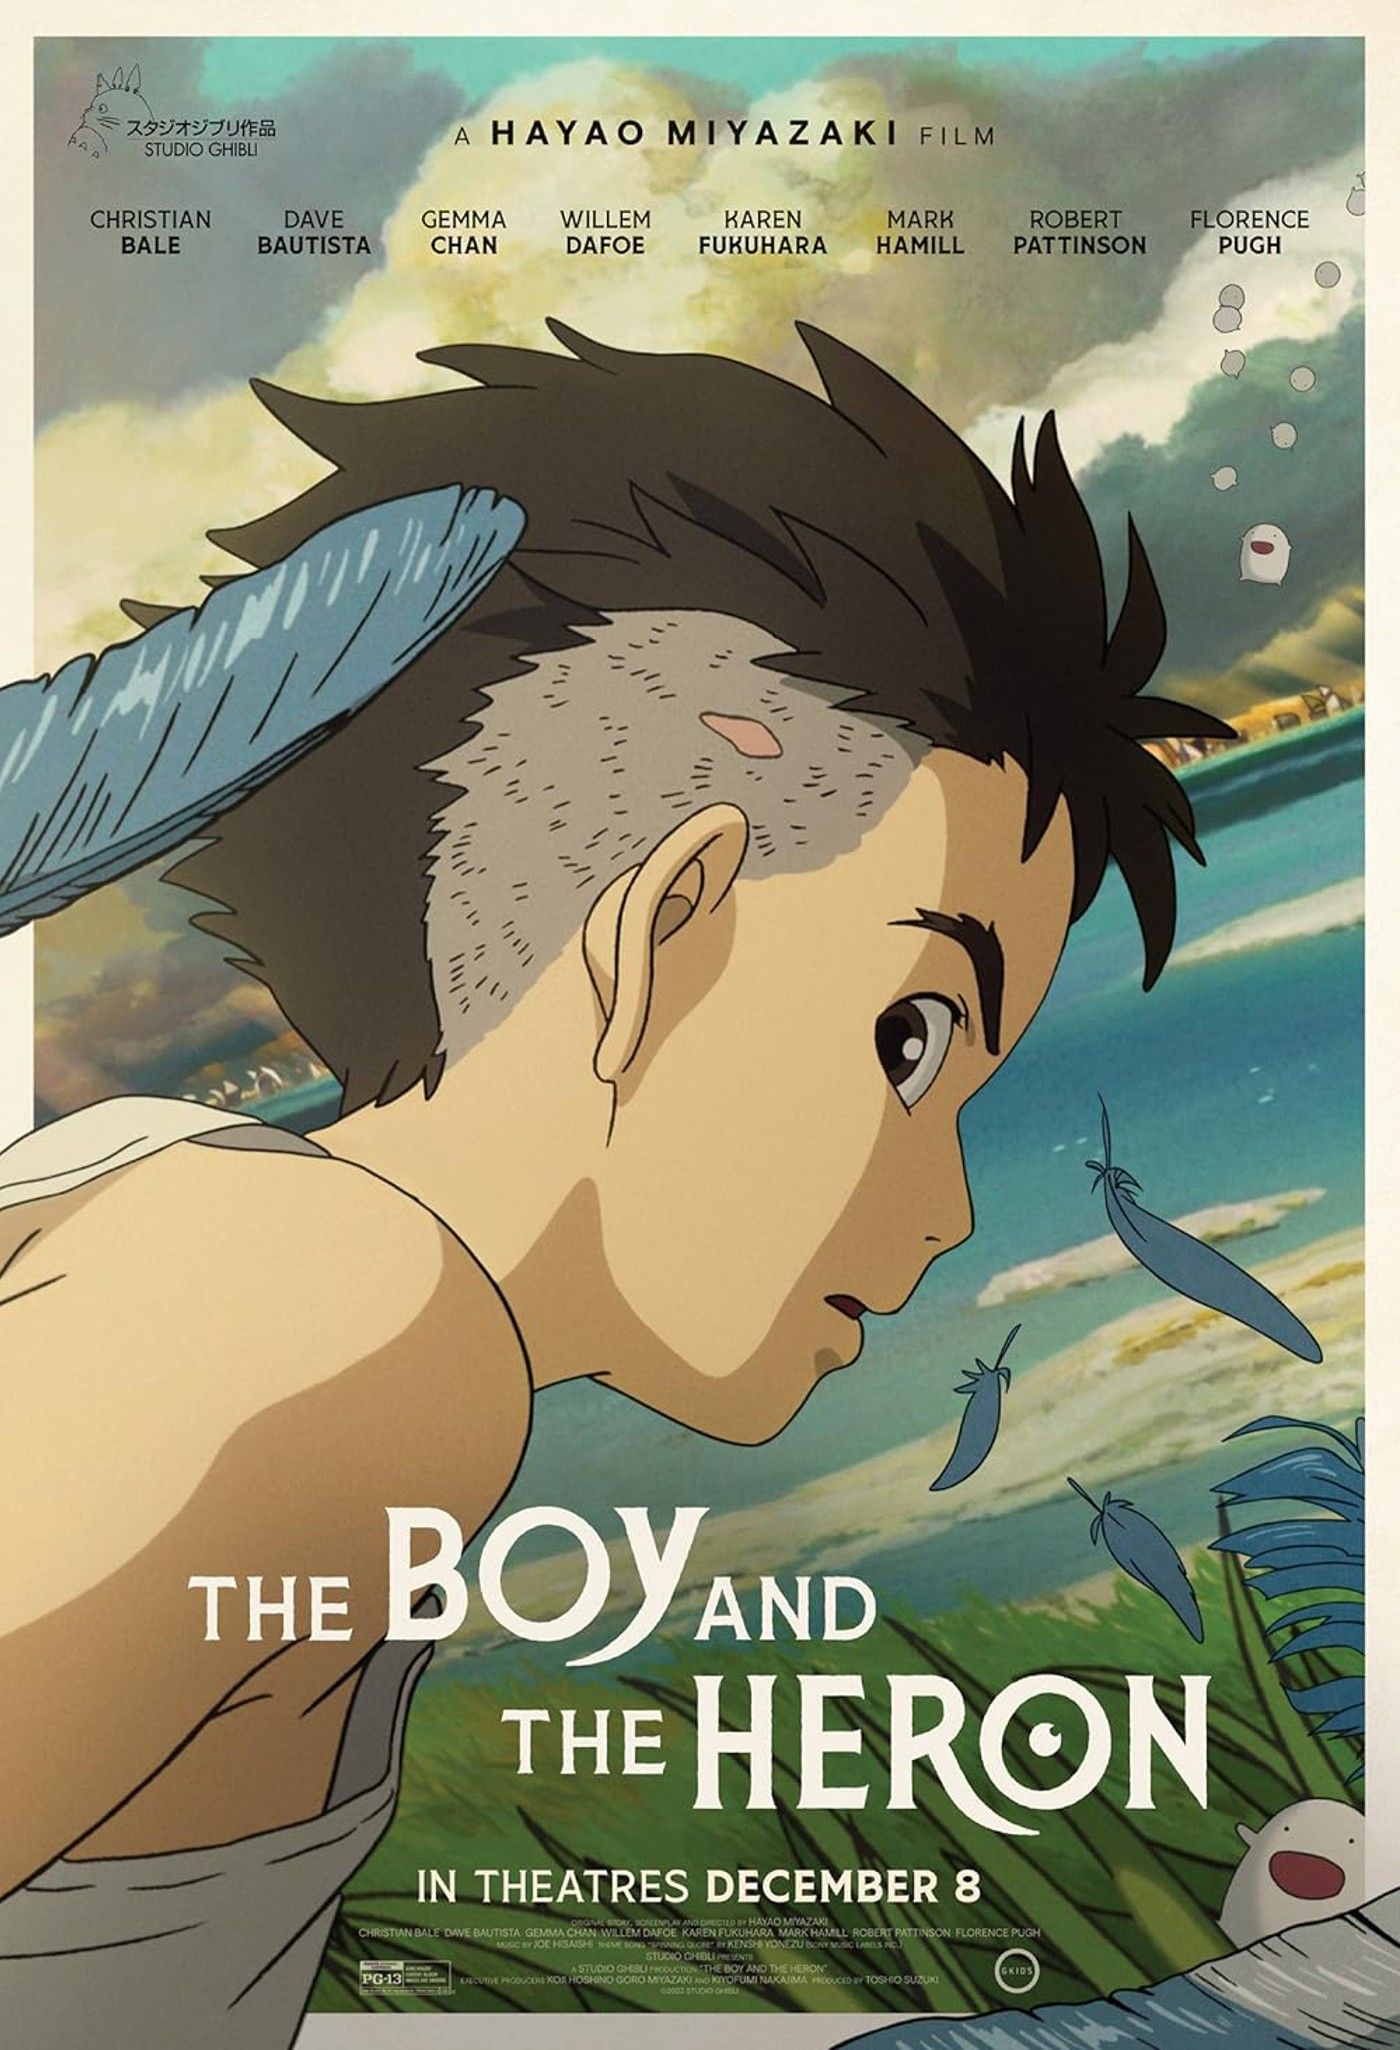 Surpassed Dragon Ball – The Boy And the Heron Reaches Incredible Milestone in the U.S.